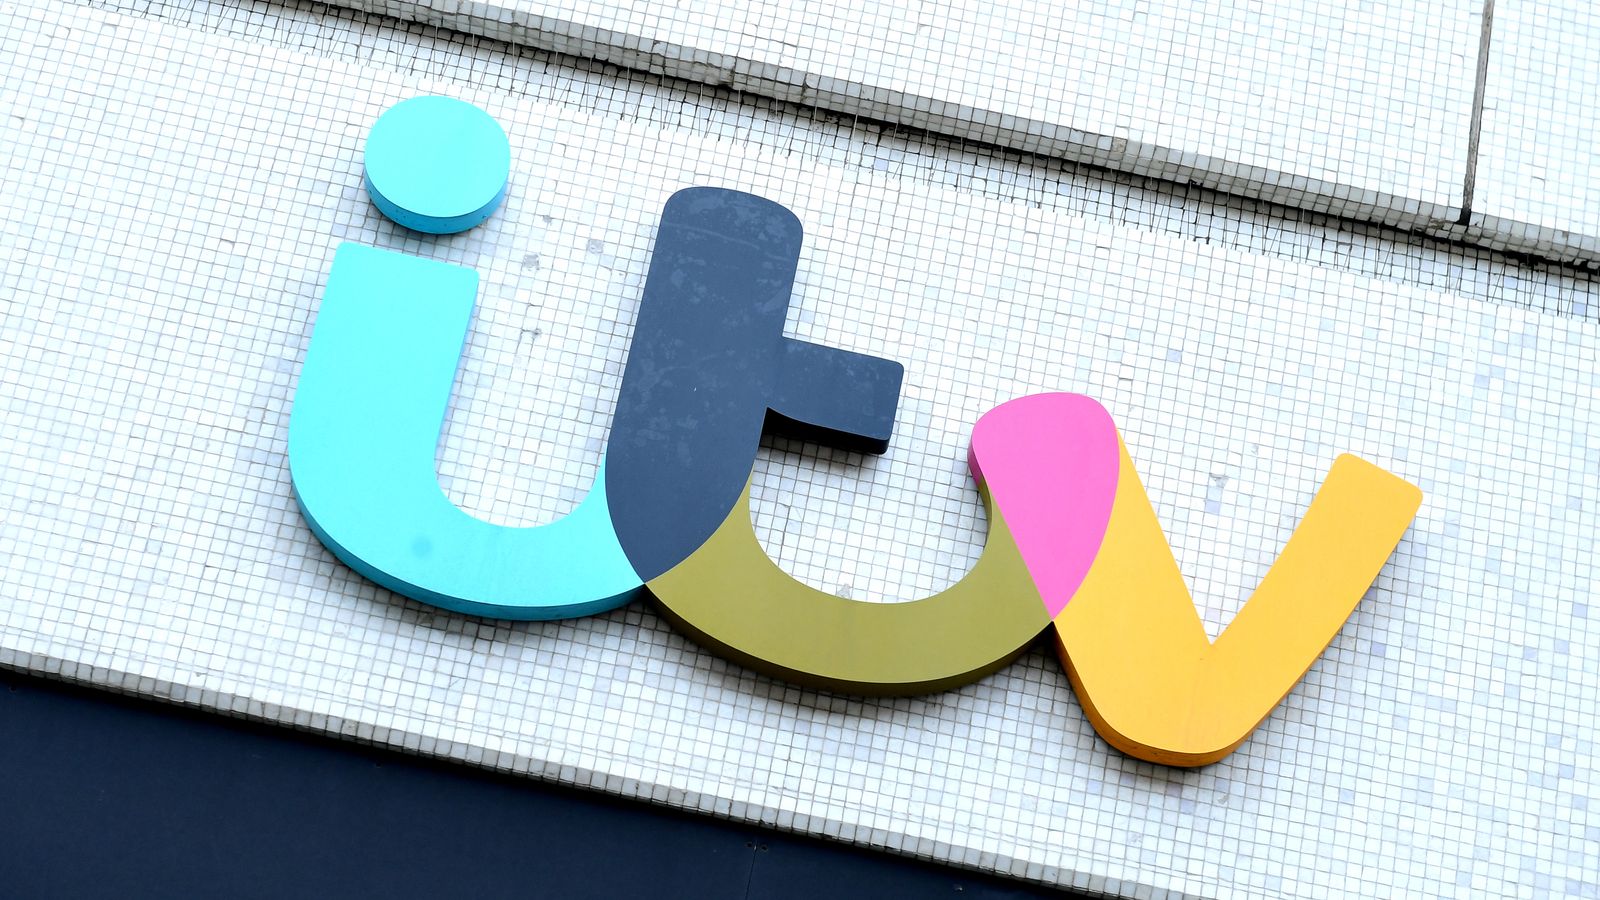 This Morning staff 'faced further bullying' after reporting show's toxic working culture to ITV